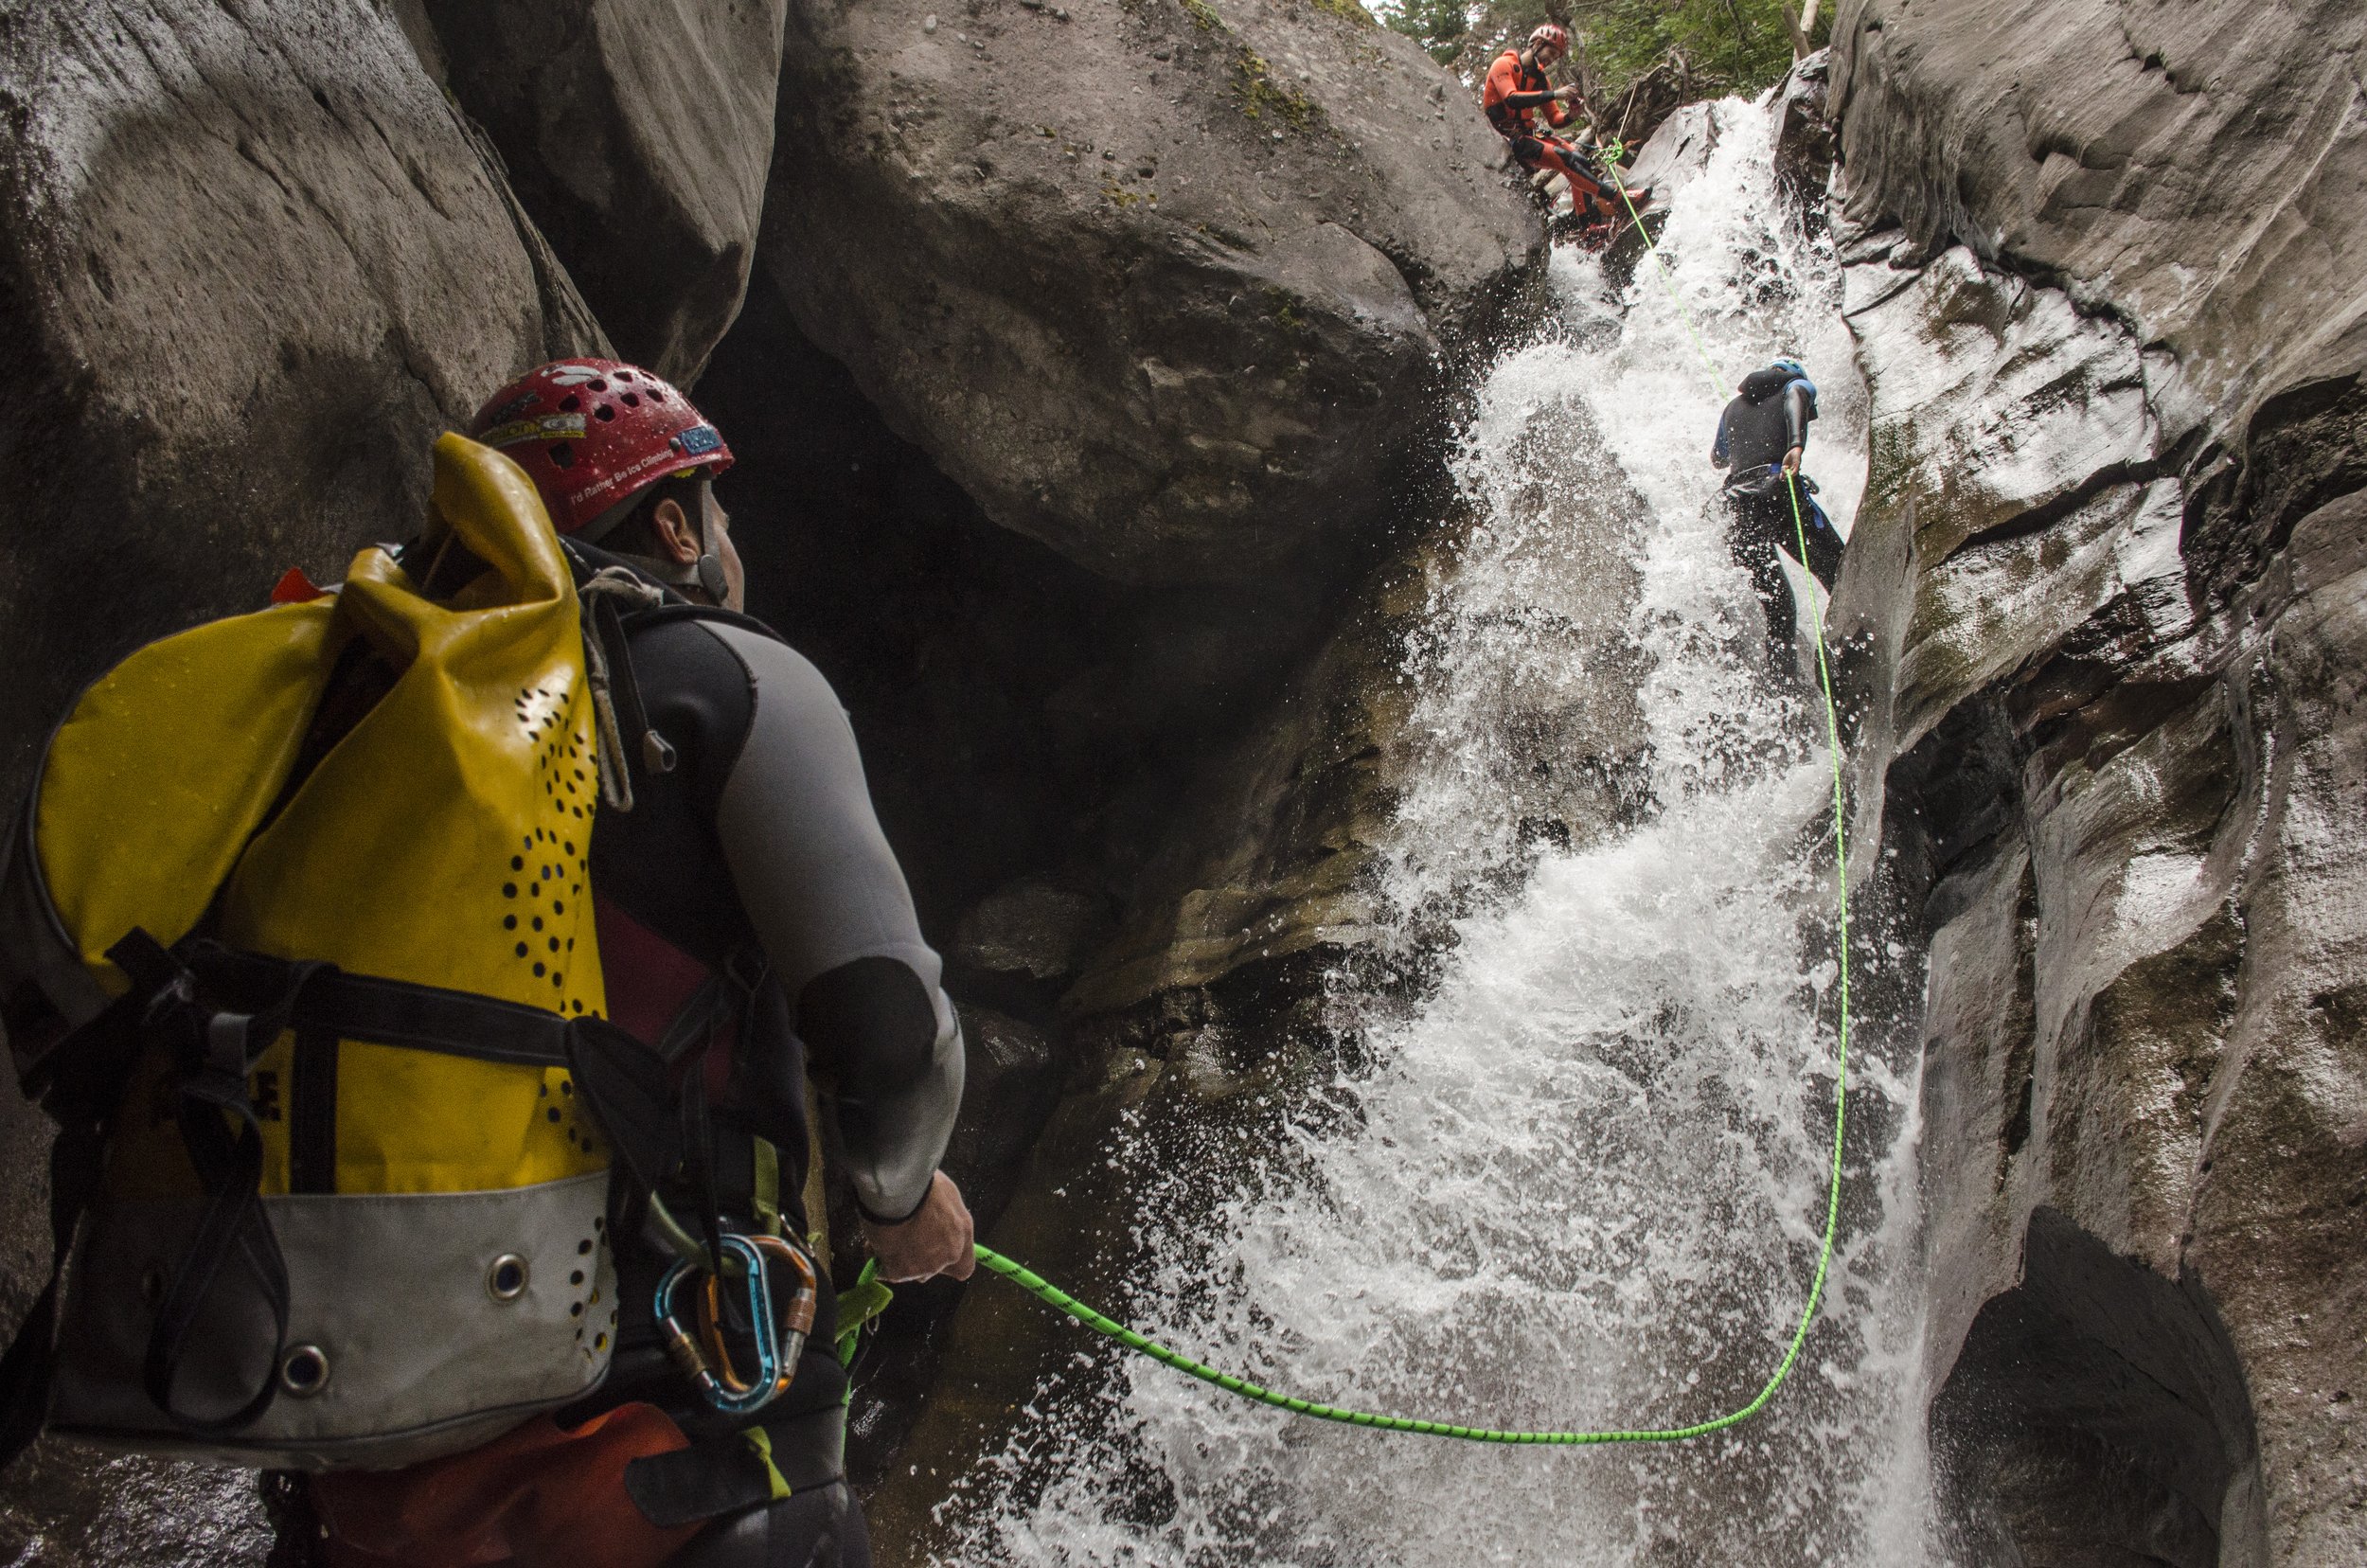 People repelling down waterfall in Ouray